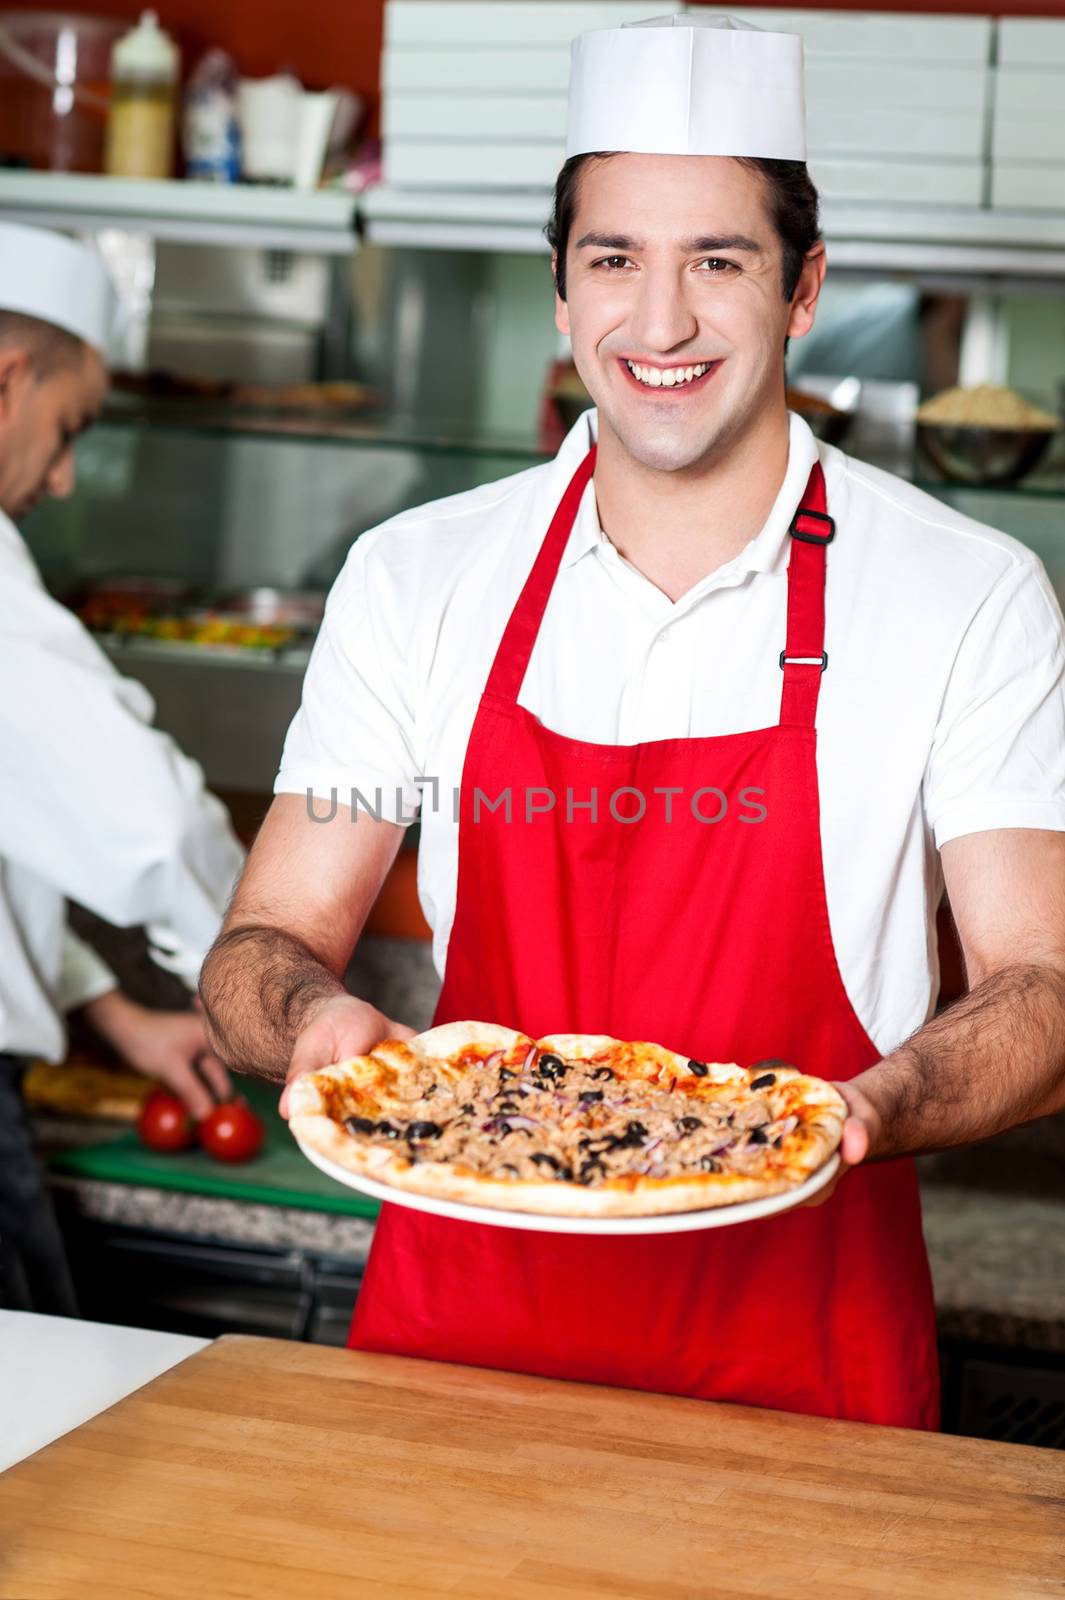 Smiling young male chef handing over pizza